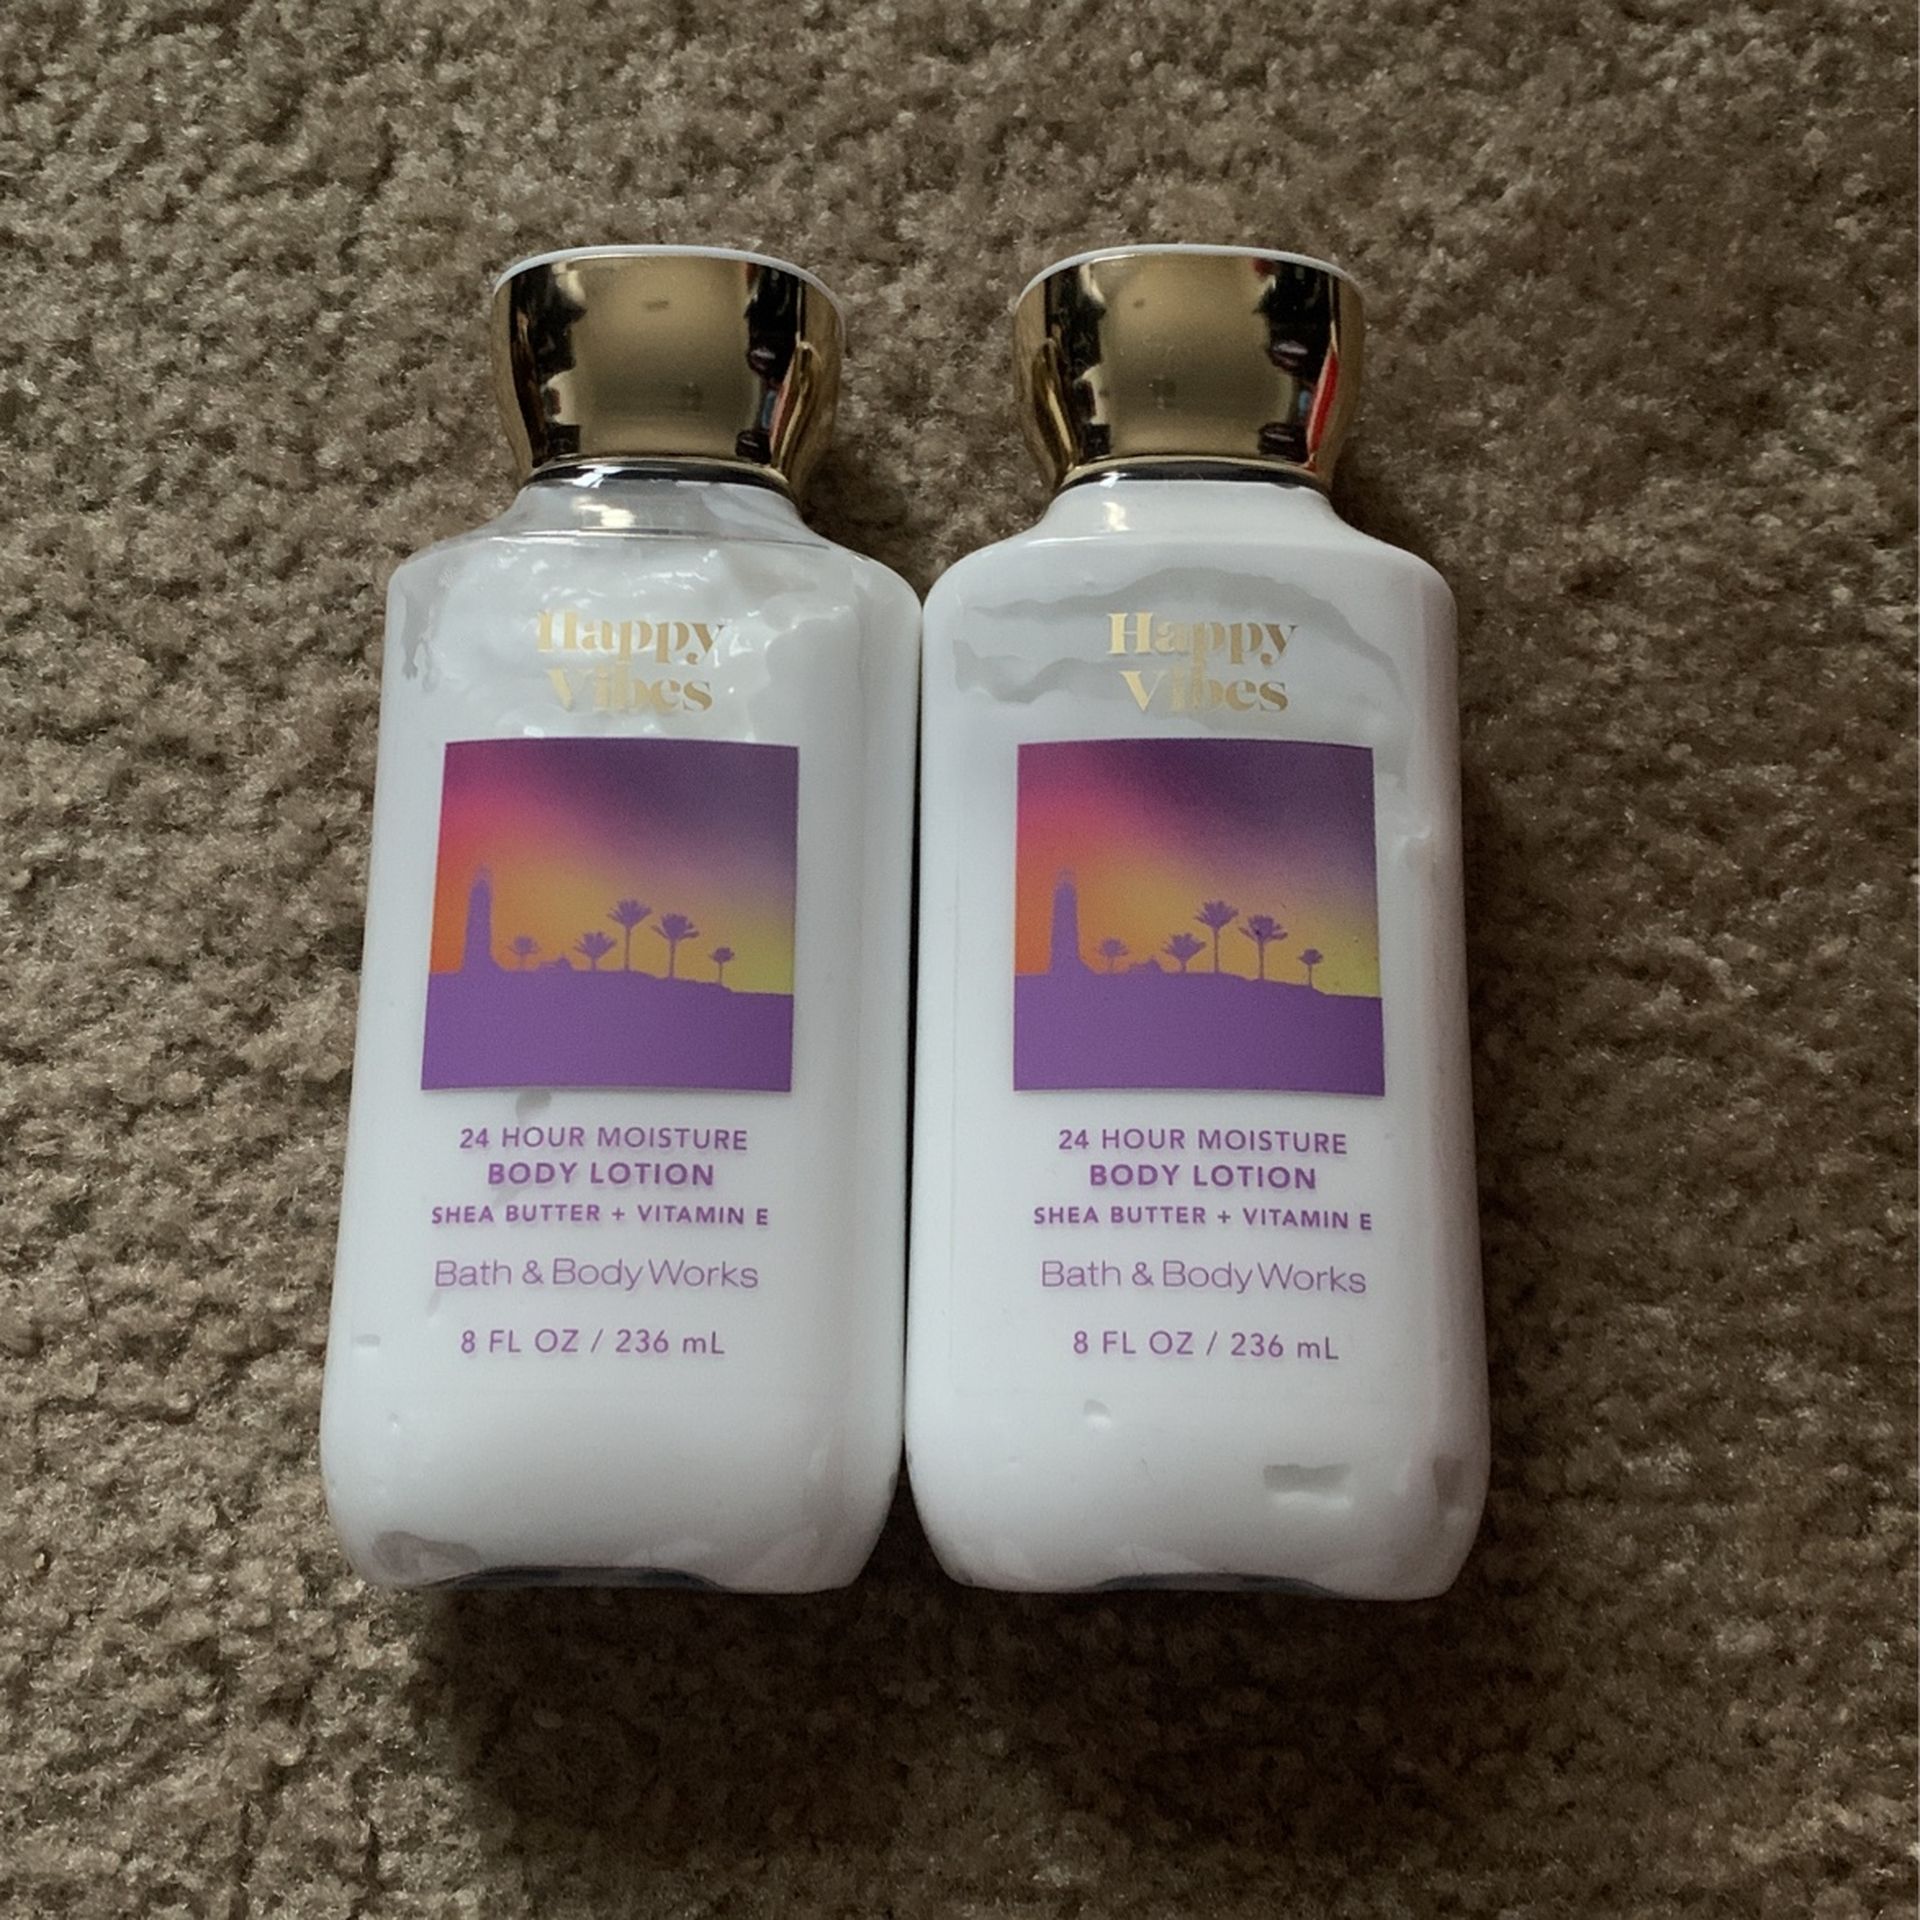 2 Bottles Of Happy Vibes Lotion From Bath And Body Works